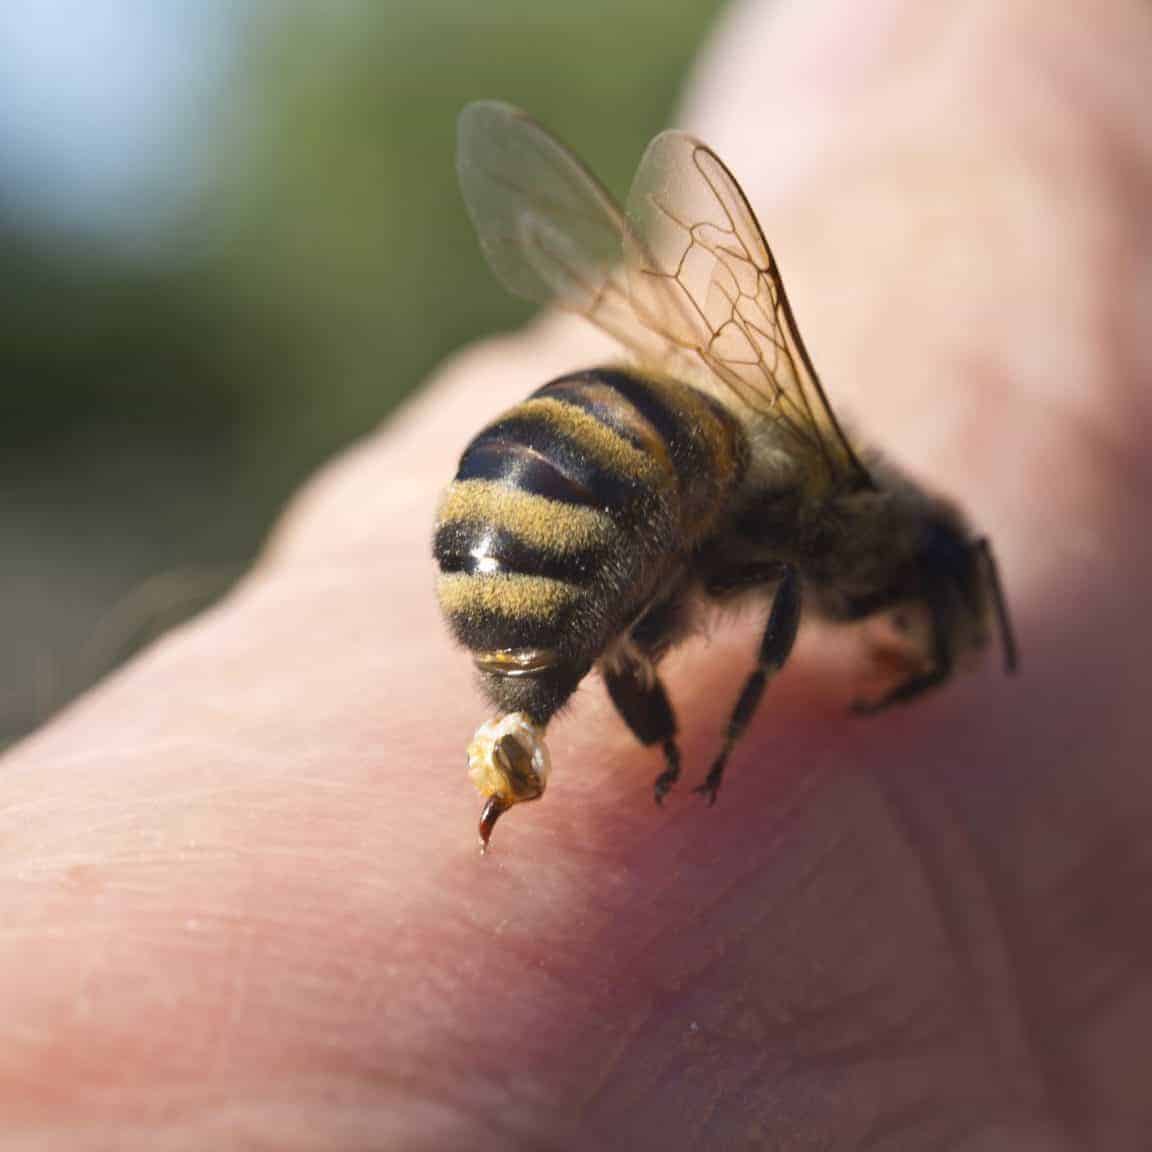 Do Bees Bite People?